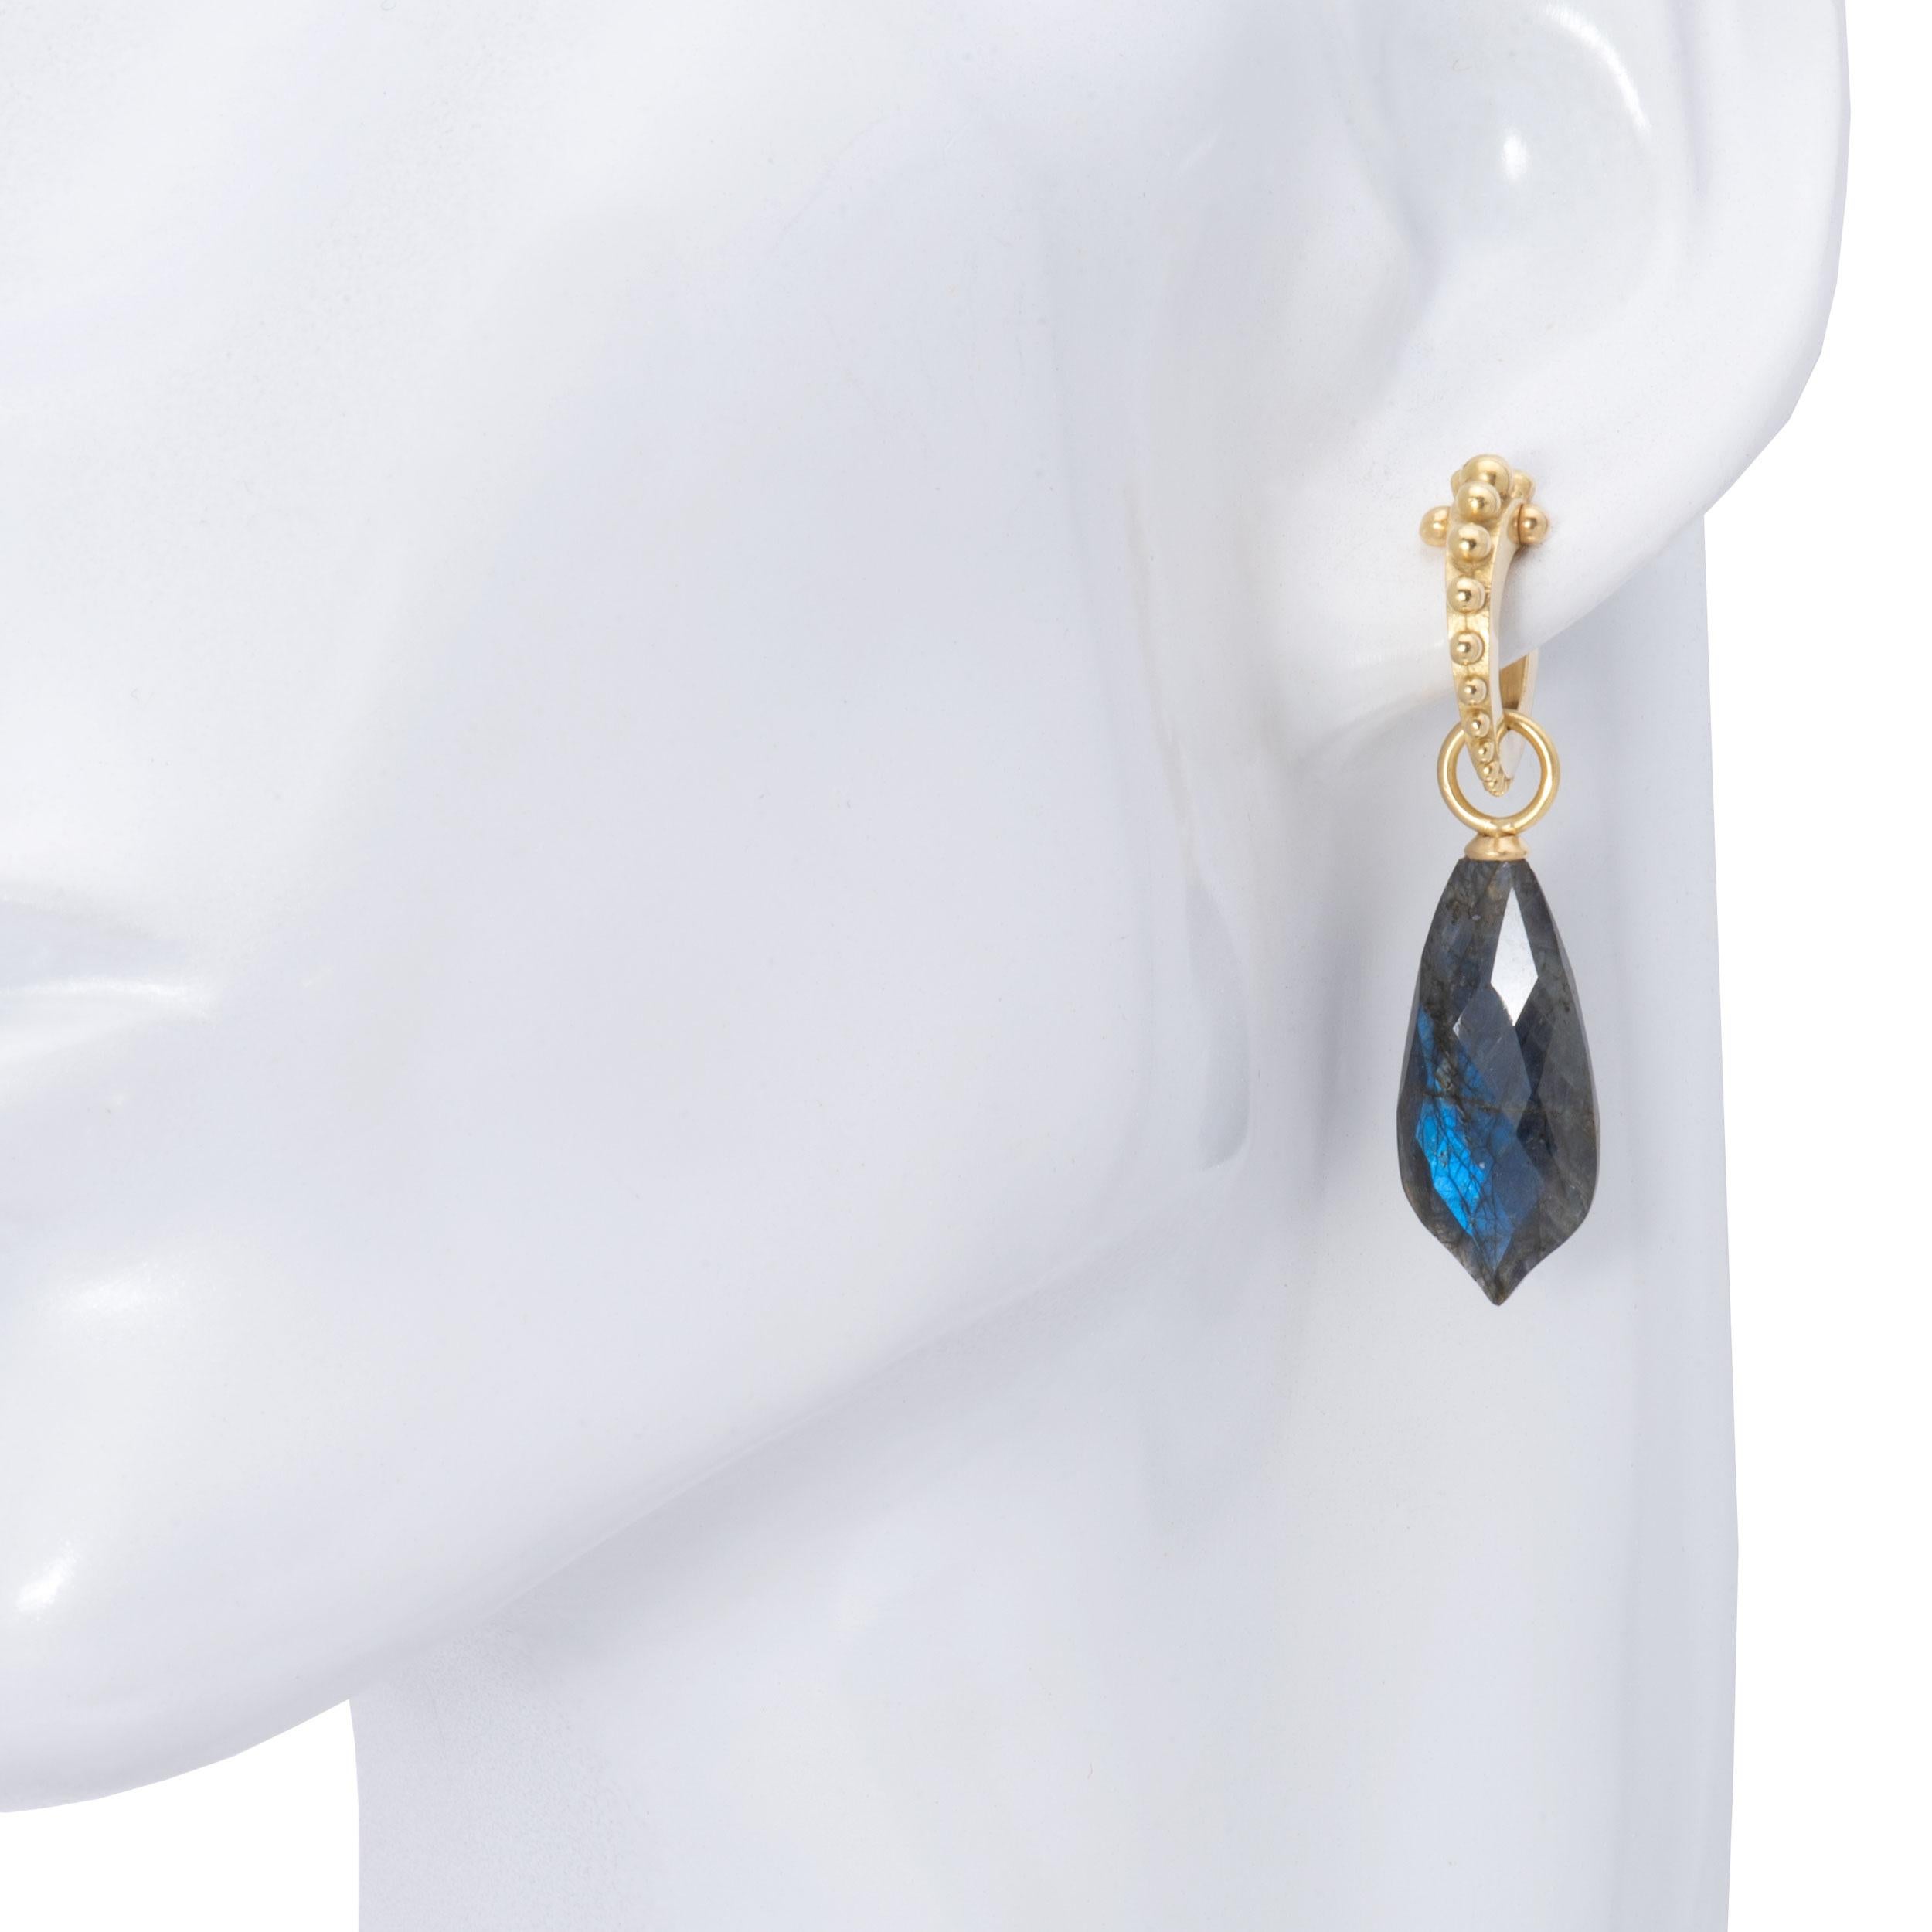 Faceted Labradorite Briolette Drop Earrings in 18 Karat Gold In New Condition For Sale In Santa Fe, NM